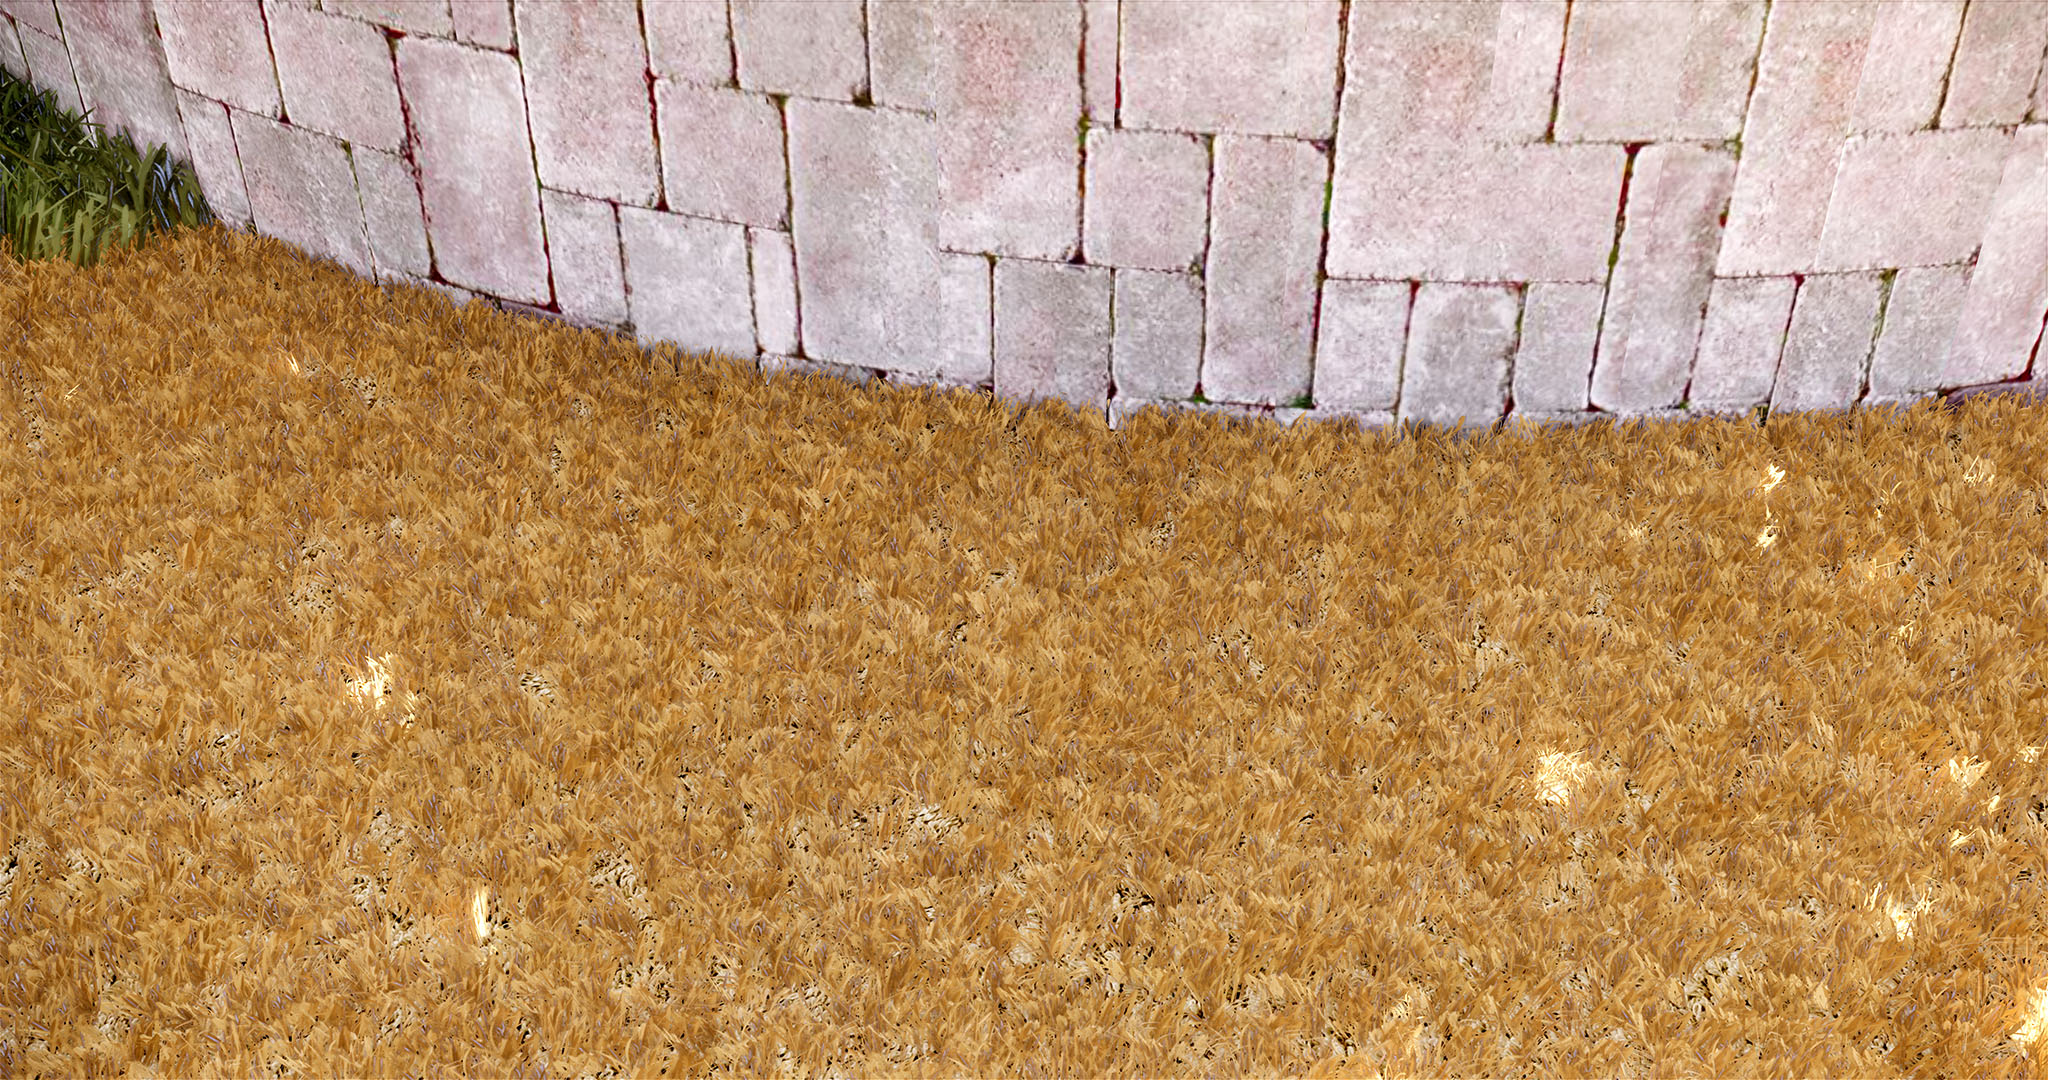 Example: Using grass to represent carpet, outdoor carpet in this case